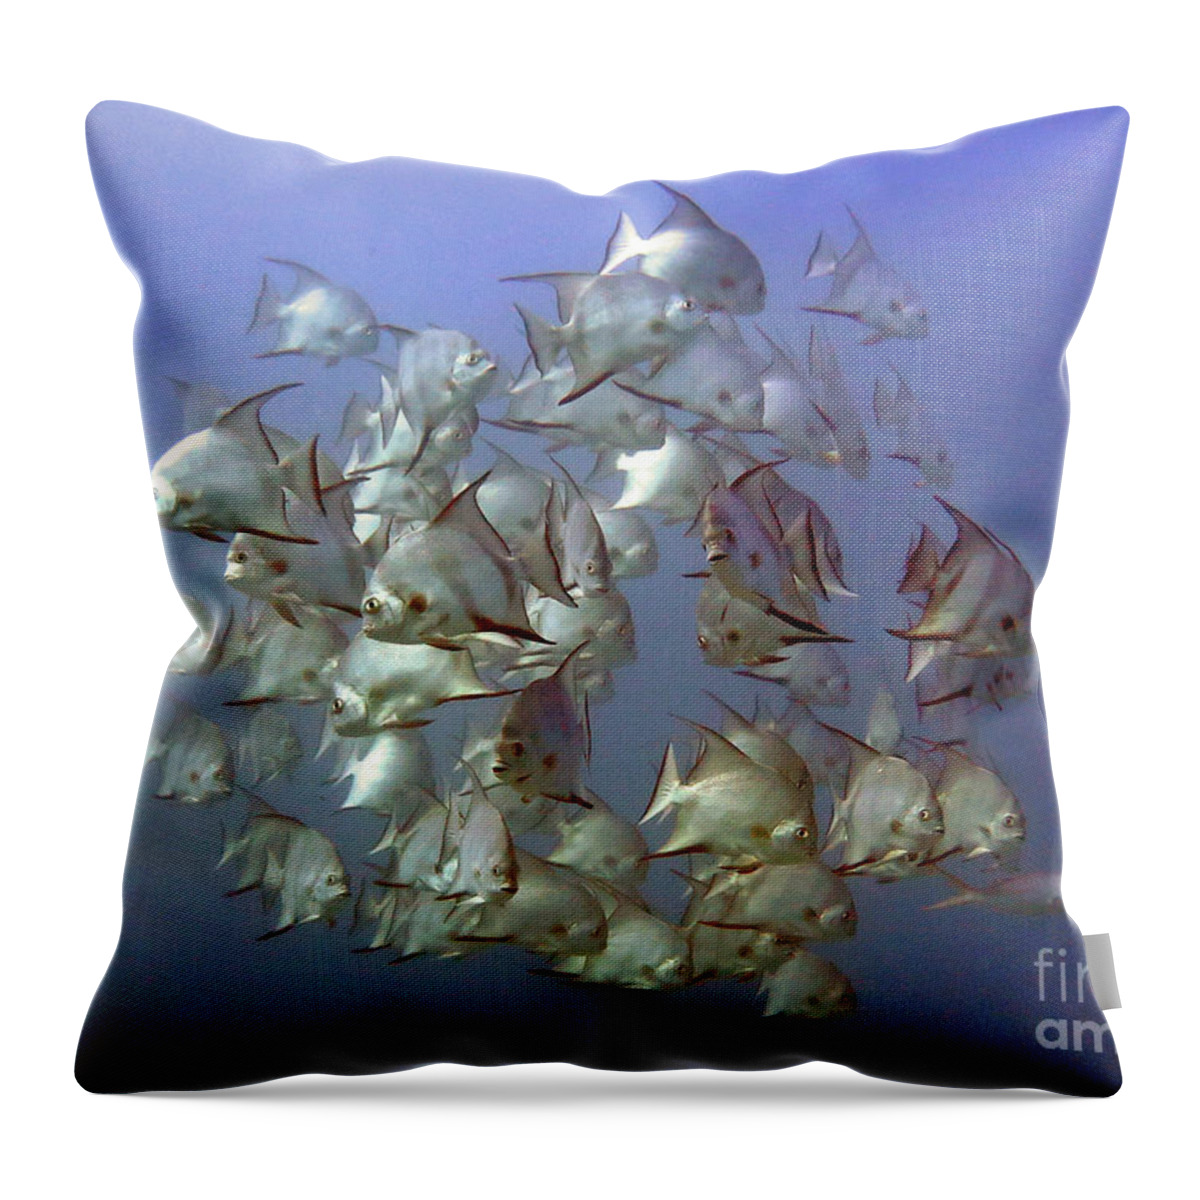 Underwater Throw Pillow featuring the photograph Baitball by Daryl Duda